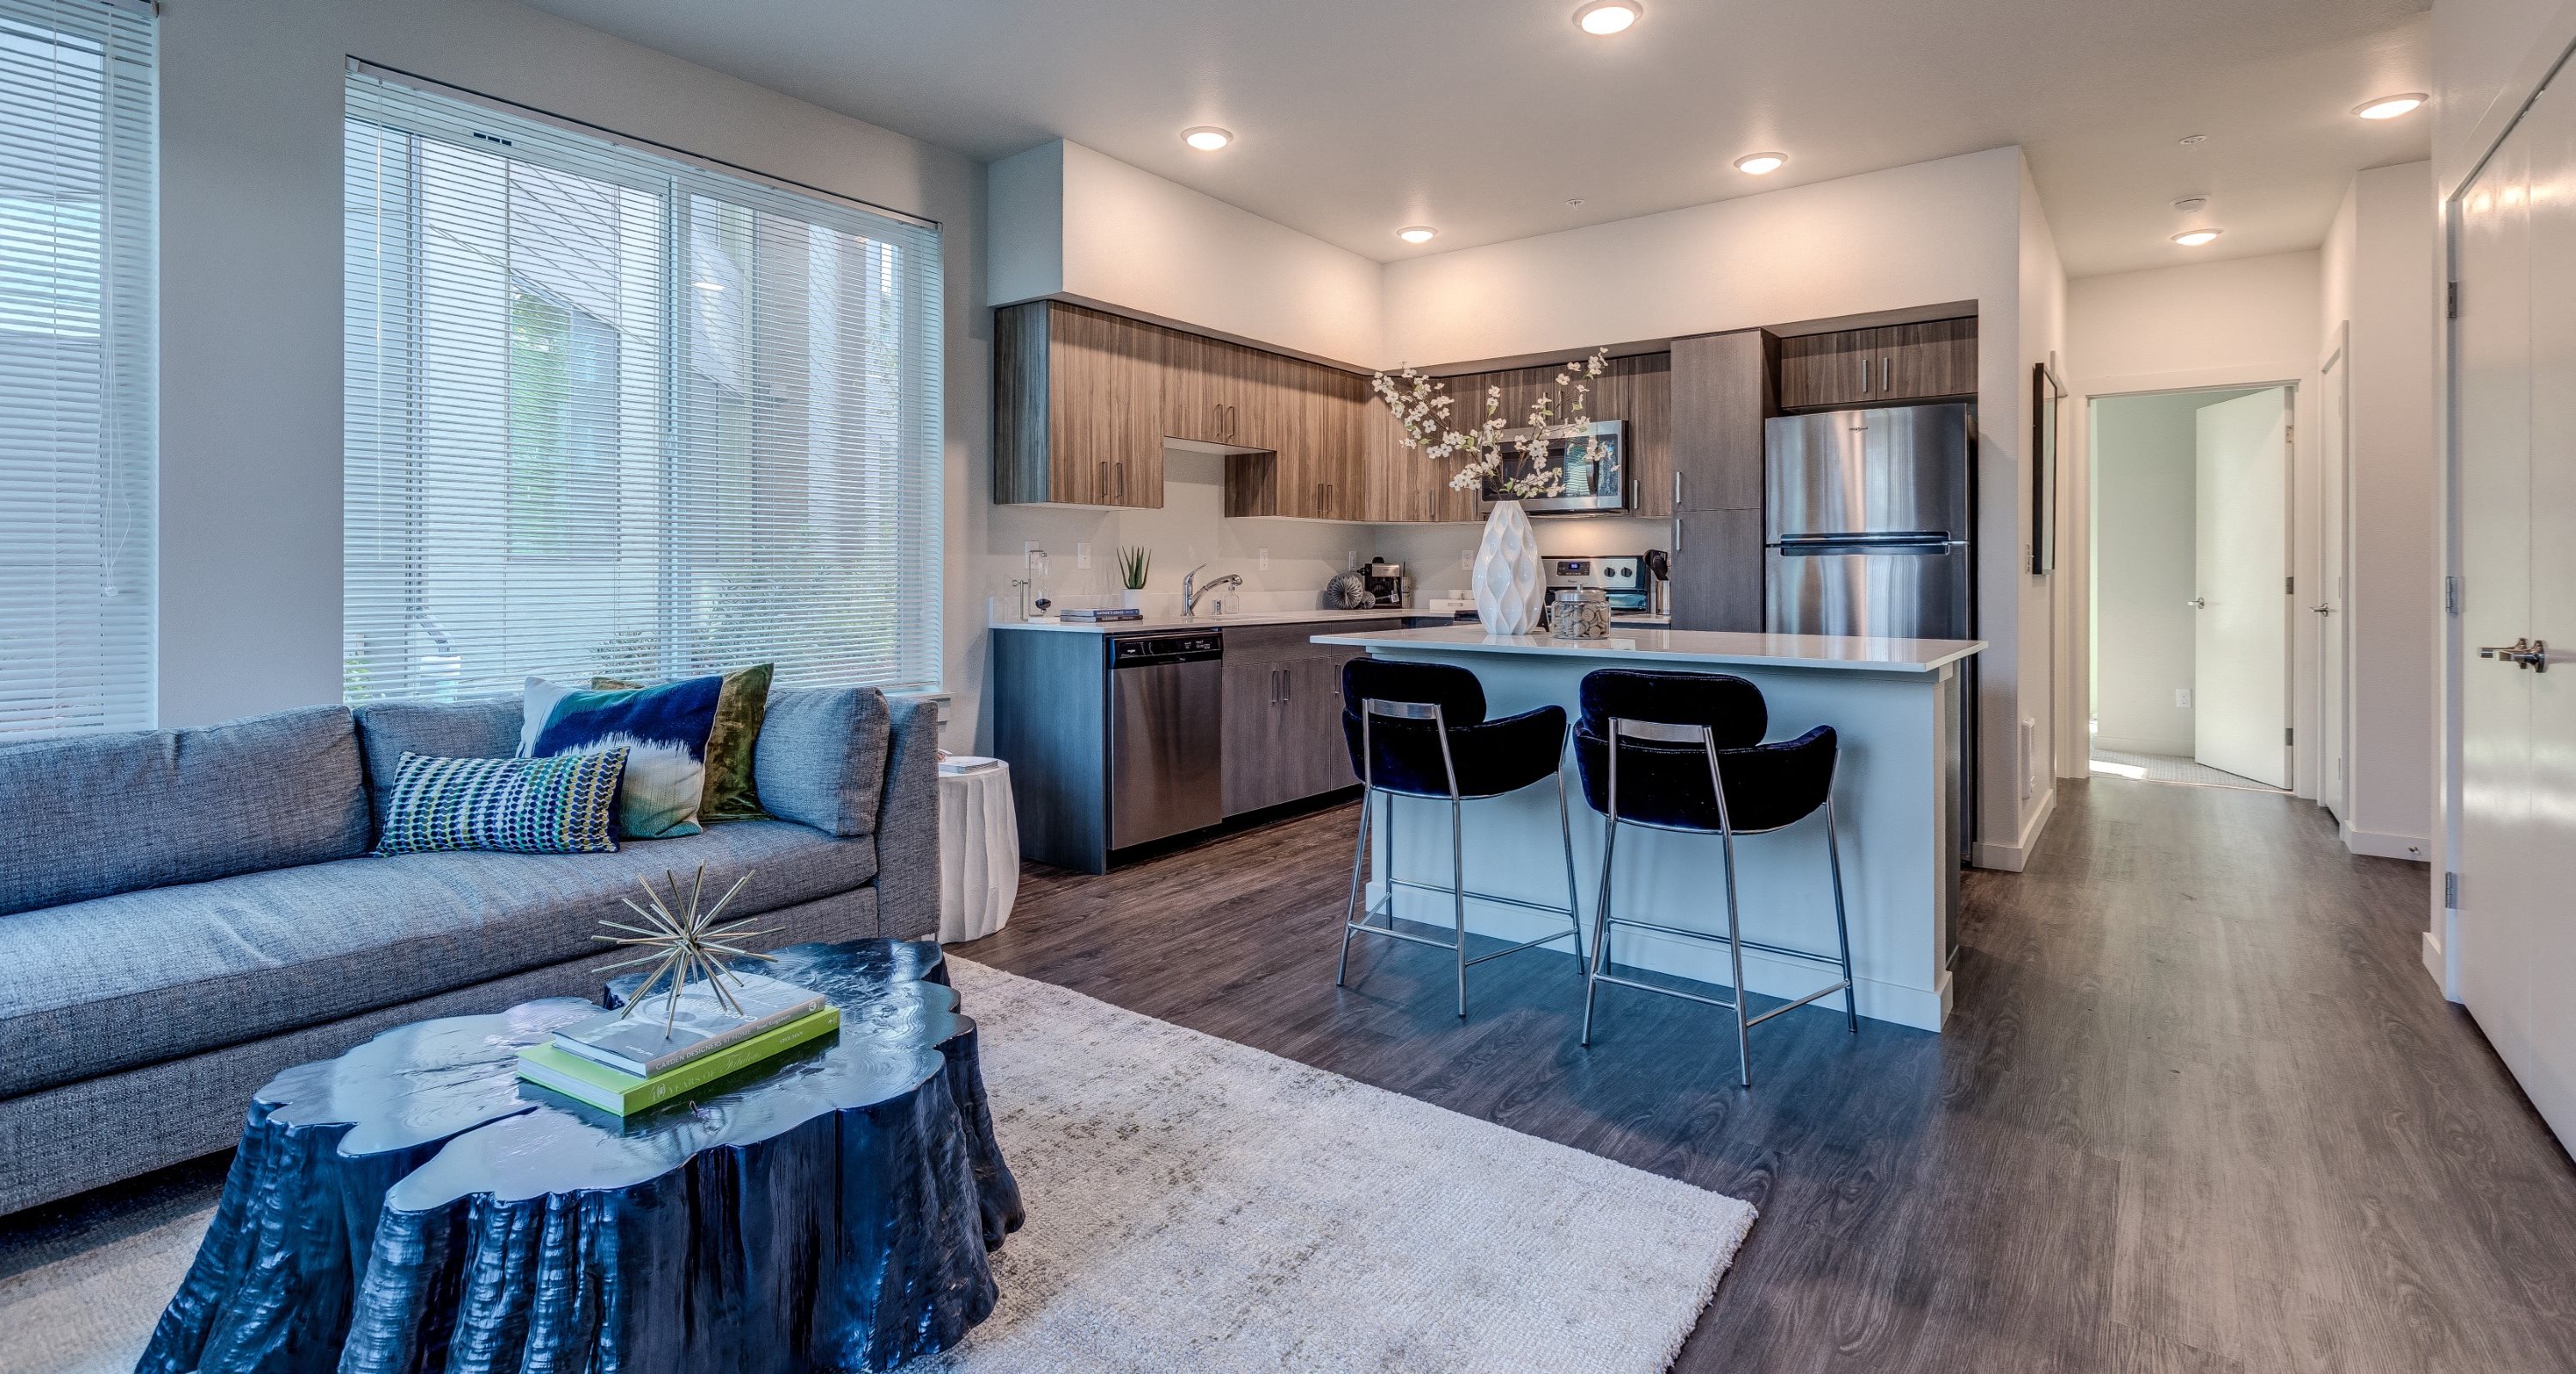 Ascend | Apartments in Maple Valley, WA3000 x 1600